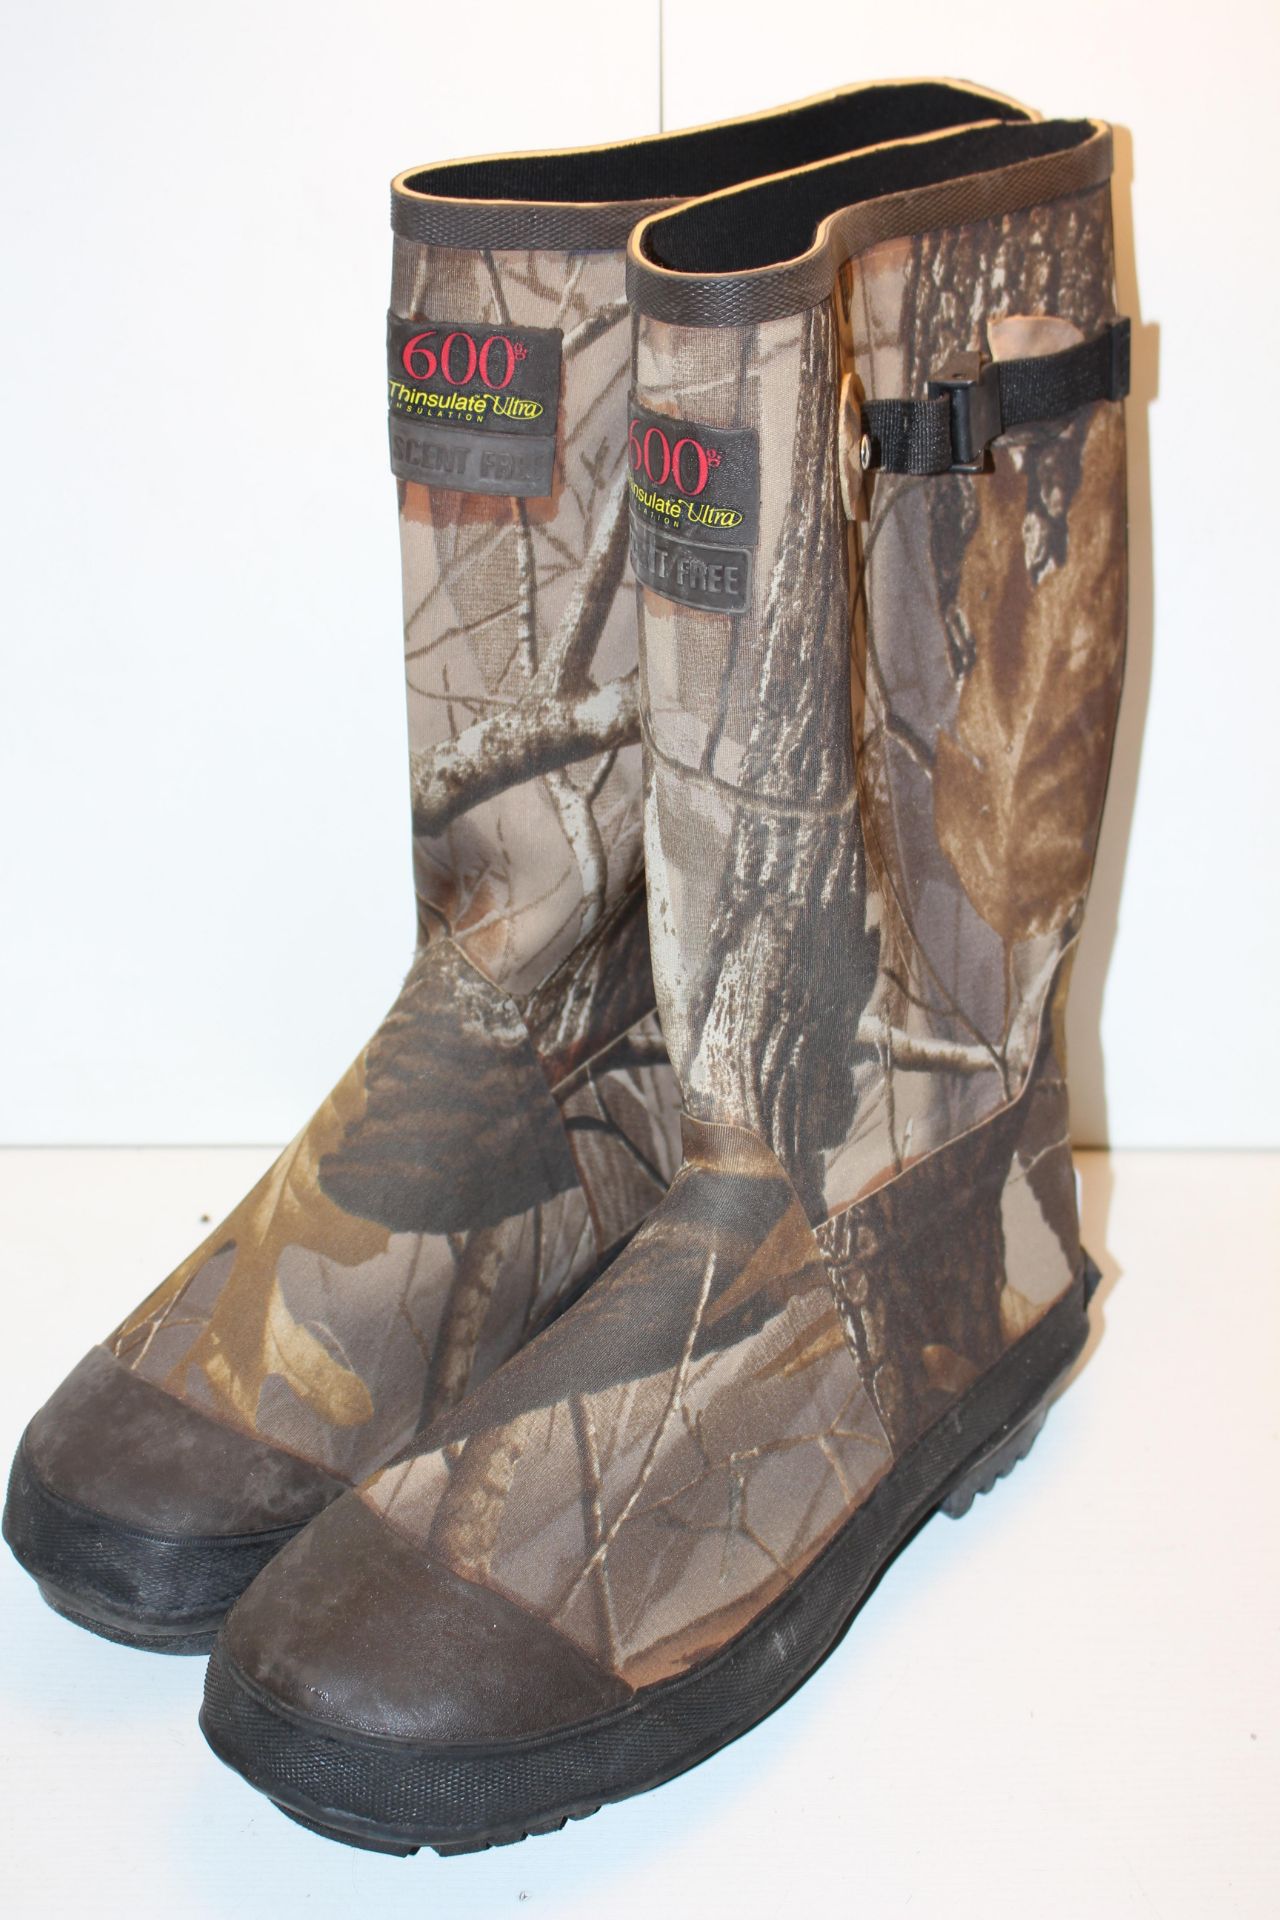 UNBOXED CAMO WELLINGTON BOOTS 11Condition ReportAppraisal Available on Request- All Items are